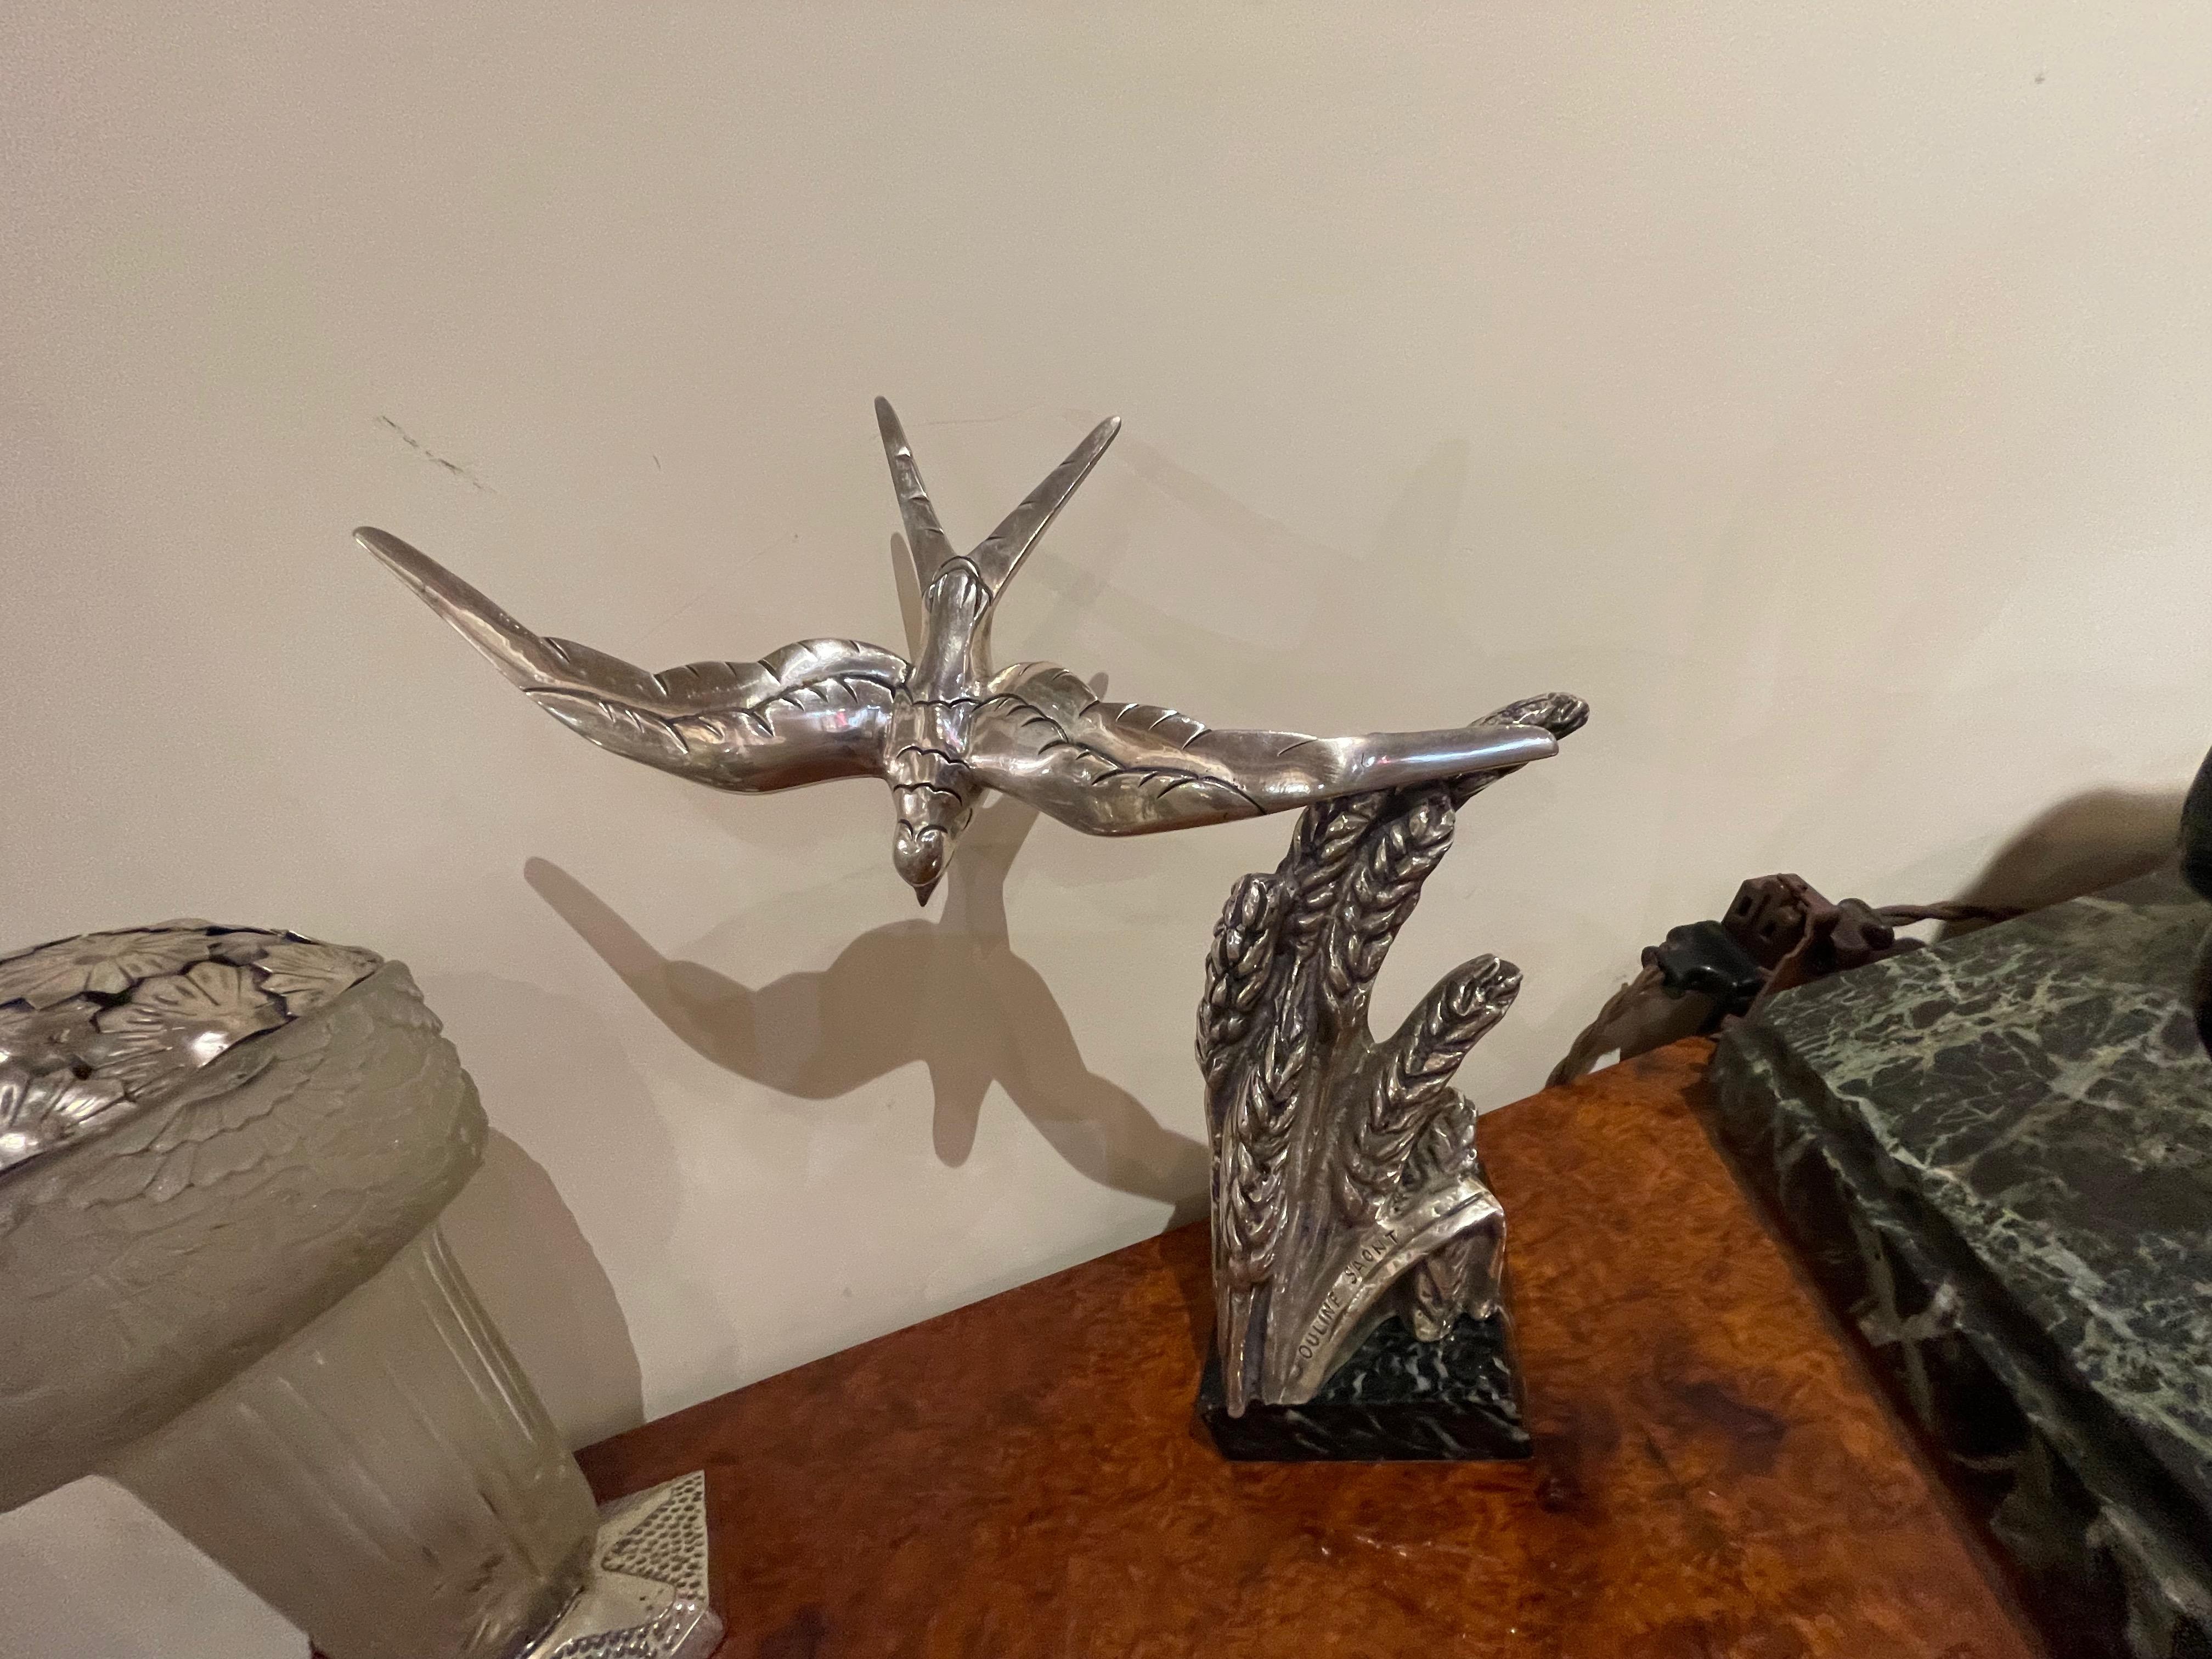 Art Deco Swallow bronze sculpture Signed Ouline. Stylized Art Deco wings showing the bird in flight, rendered as you might typically see the swallow in a natural way. Signed Ouline Saont on the lower part of the sculpture. Silvered bronze mounted on